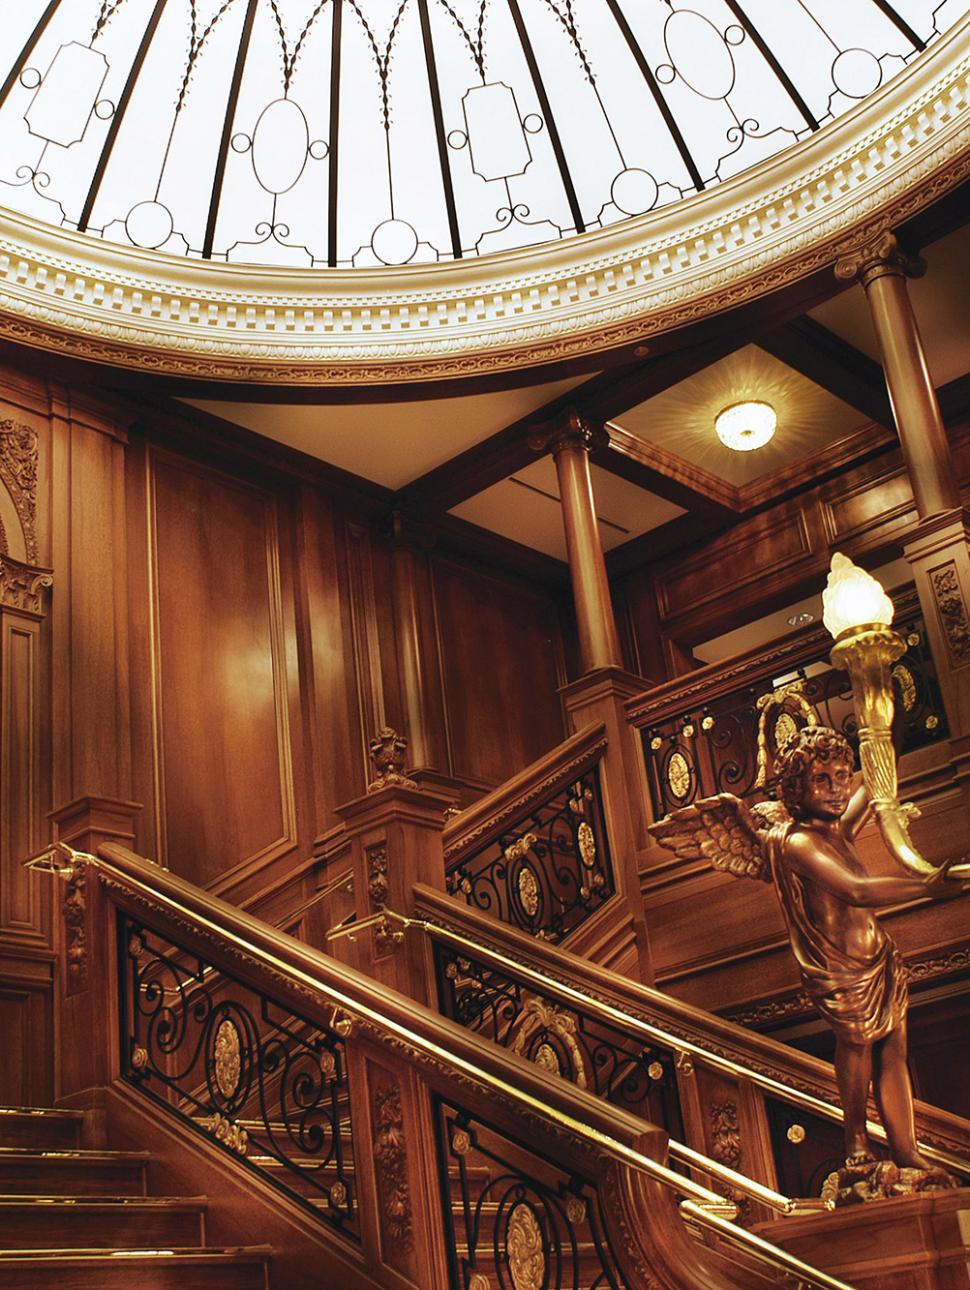 Image of the Titanic staircase, a replica at the Titanic Museum Attraction in Pigeonforge, Tennessee.